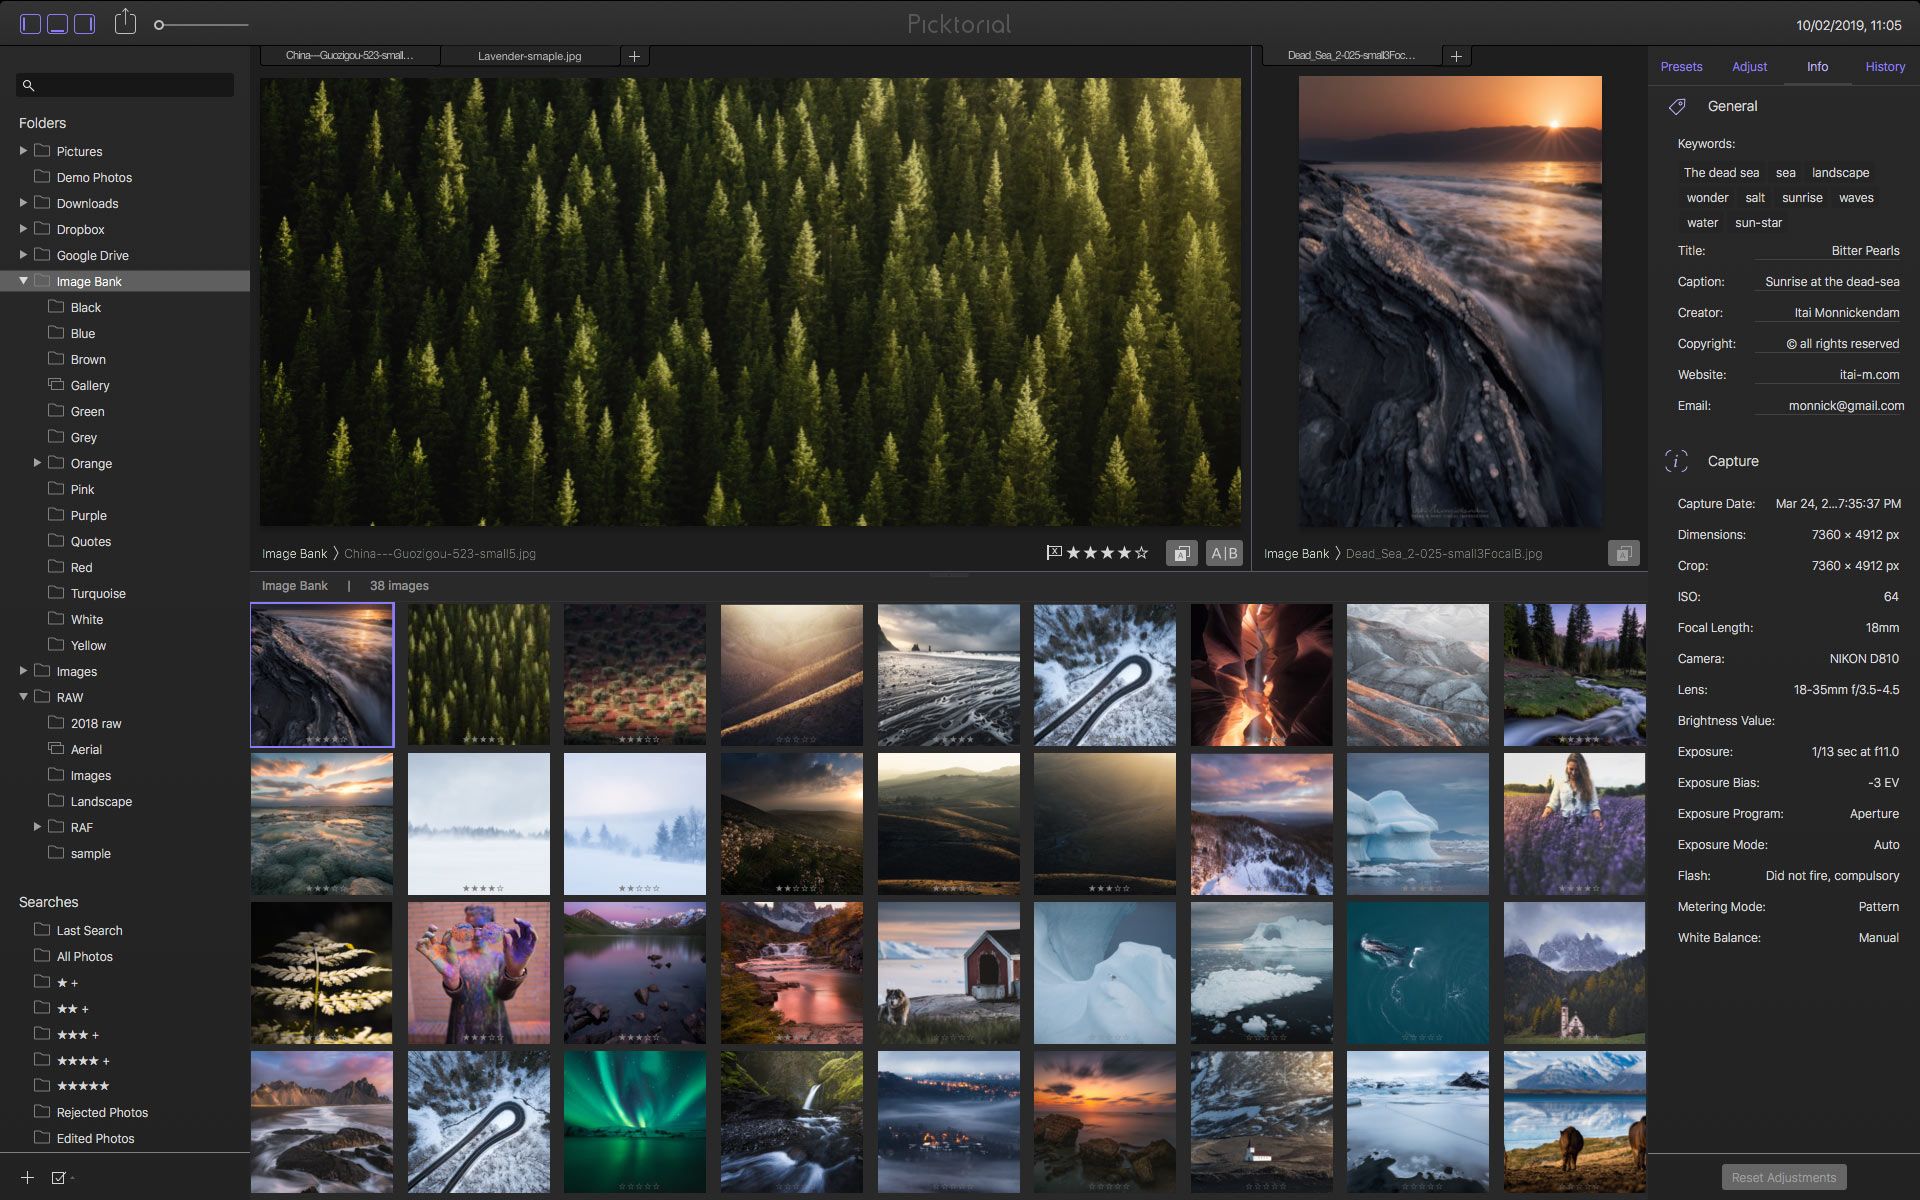 The Best Photo Editing Software that's not Photoshop